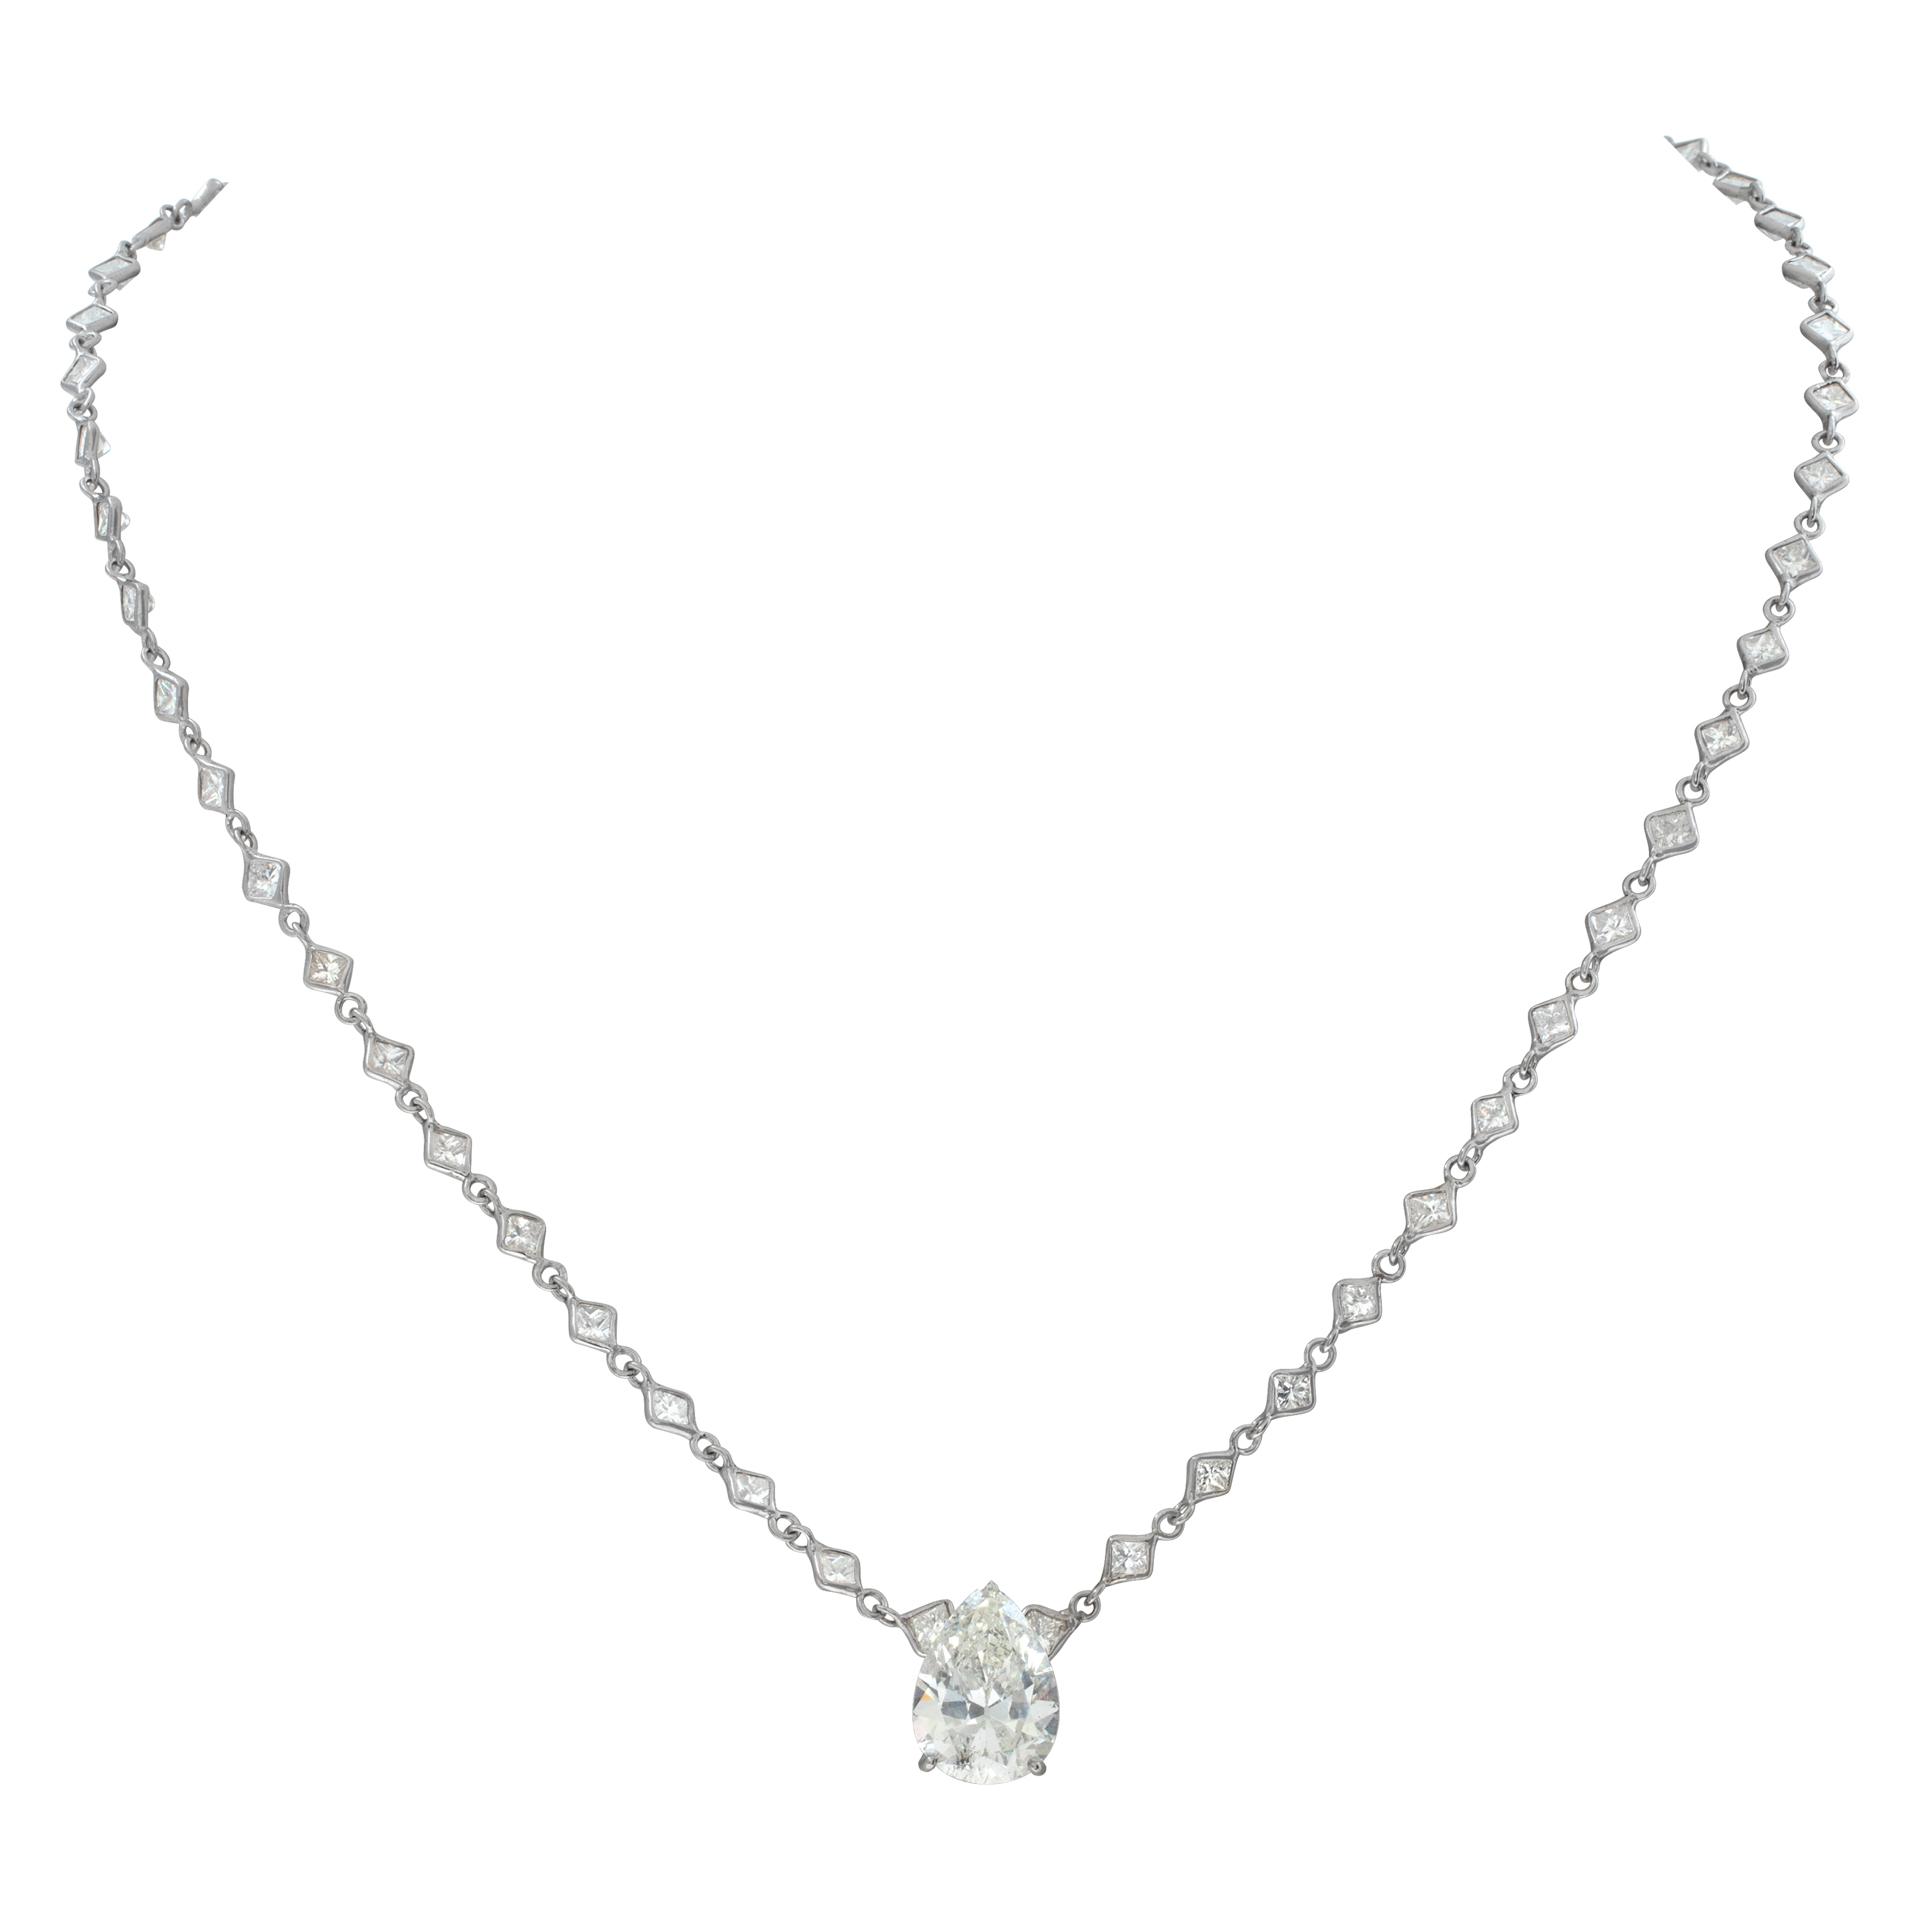 GIA certified pear shaped 3.84 carats on a necklace set with approximately 5 carats in princess cut diamonds by-the-inch